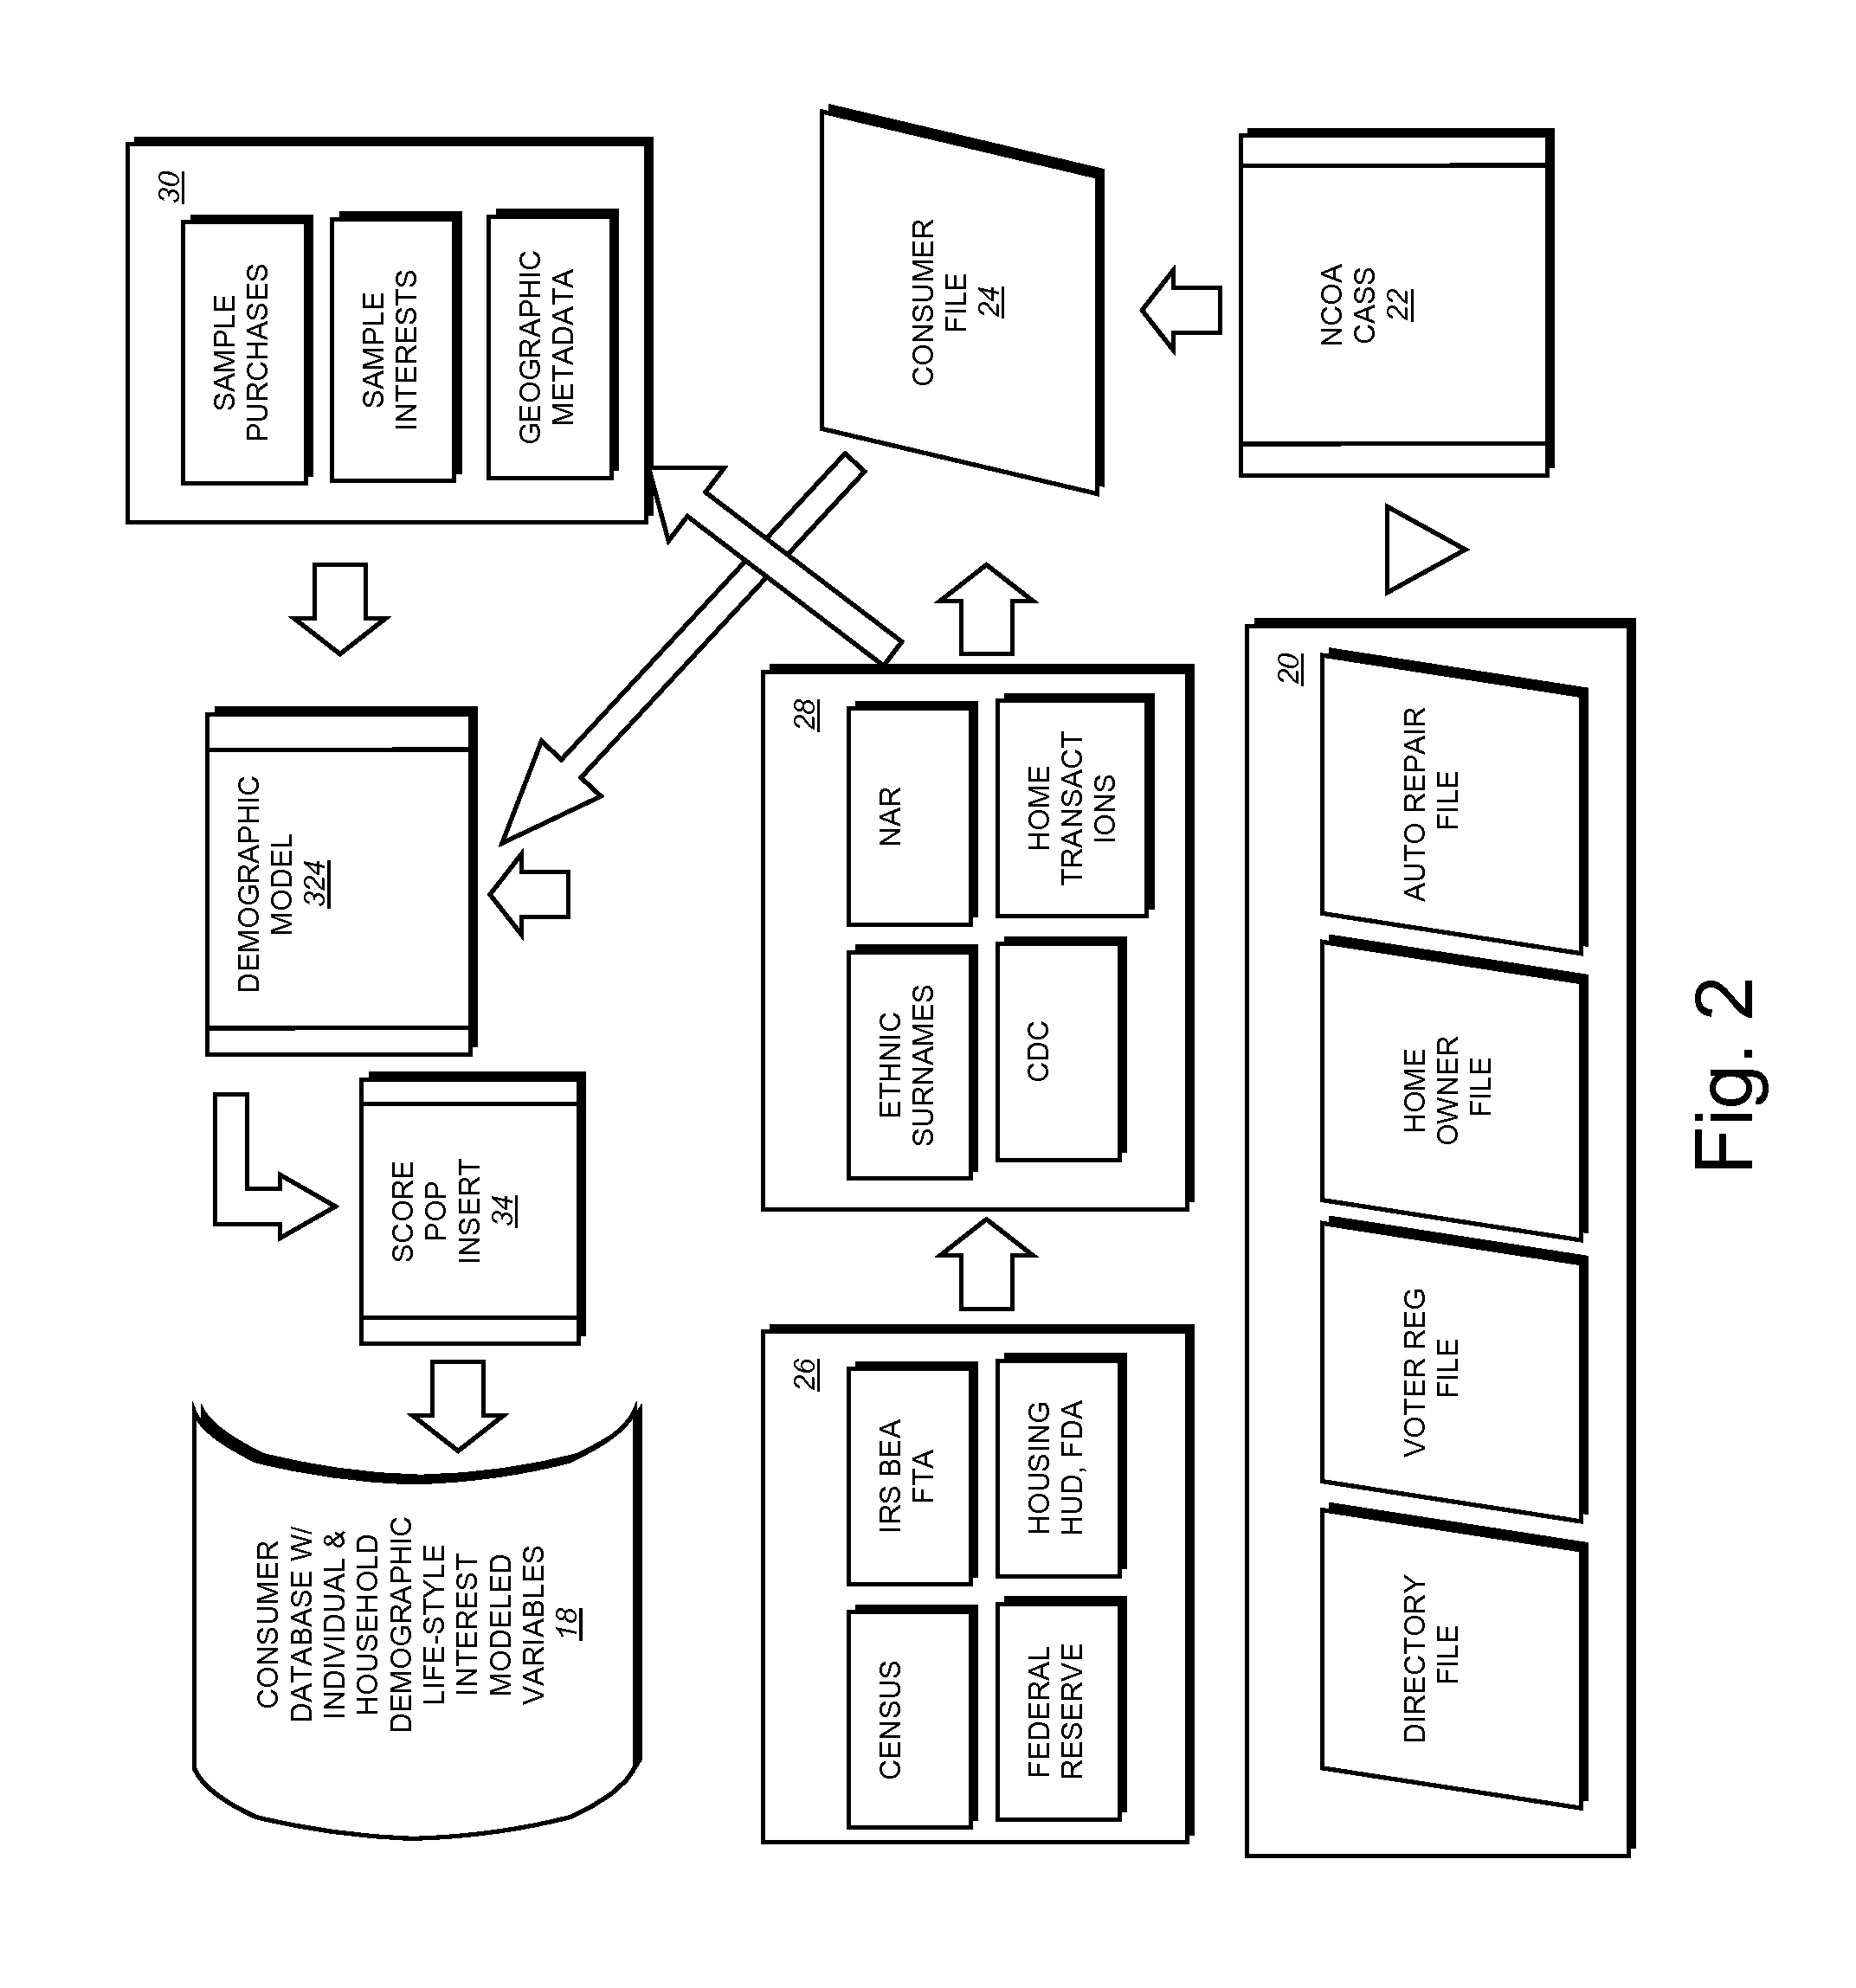 System and method for creating customized IP zones utilizing predictive modeling